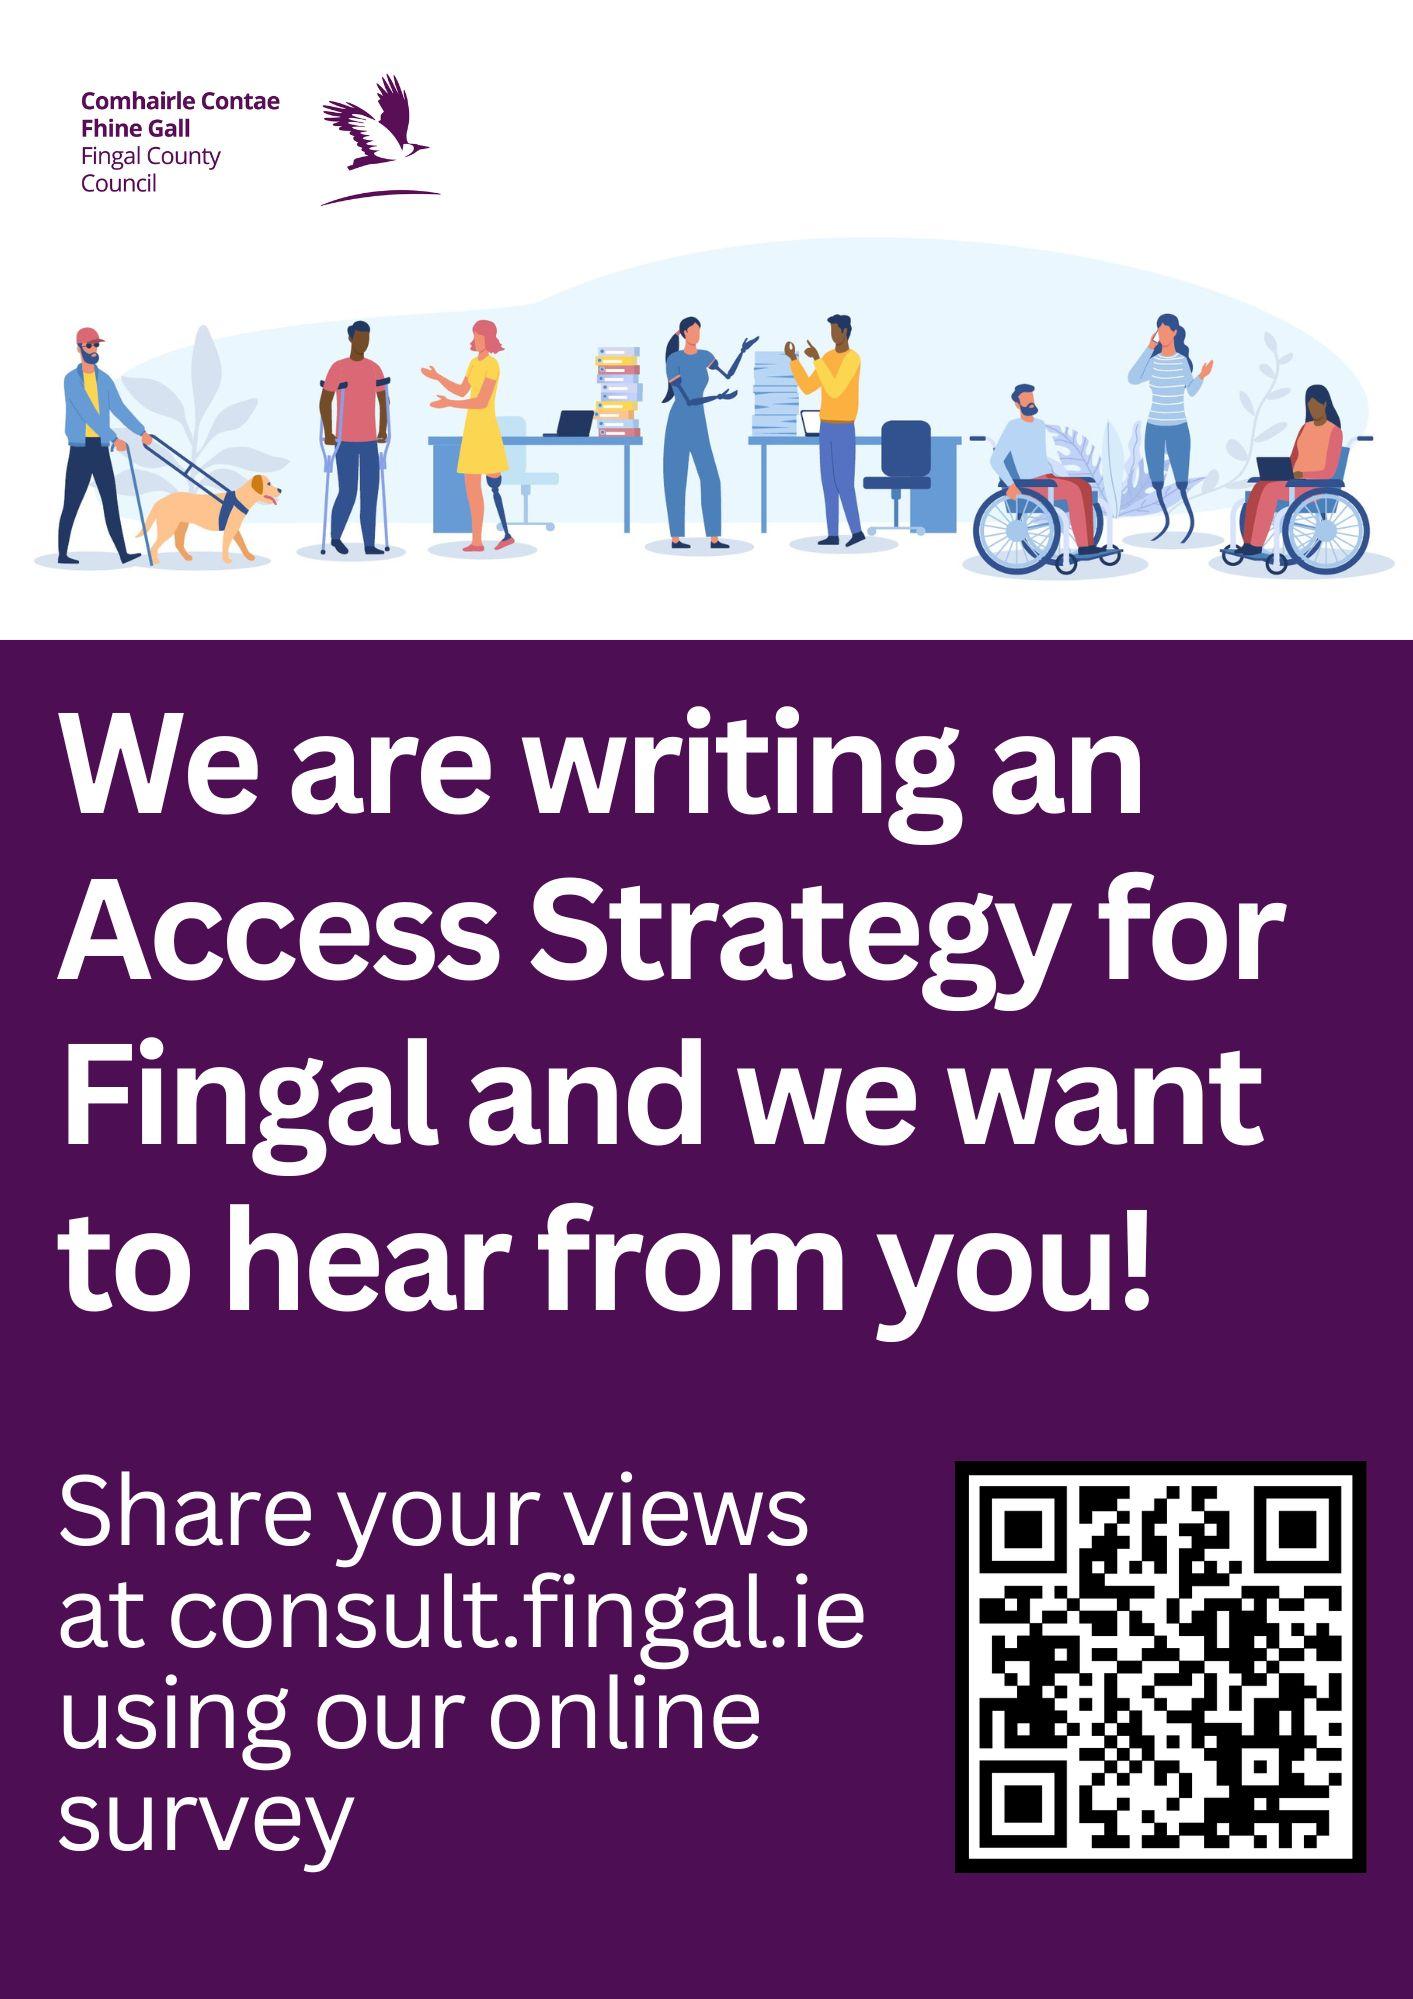 Access strategy poster with QR code